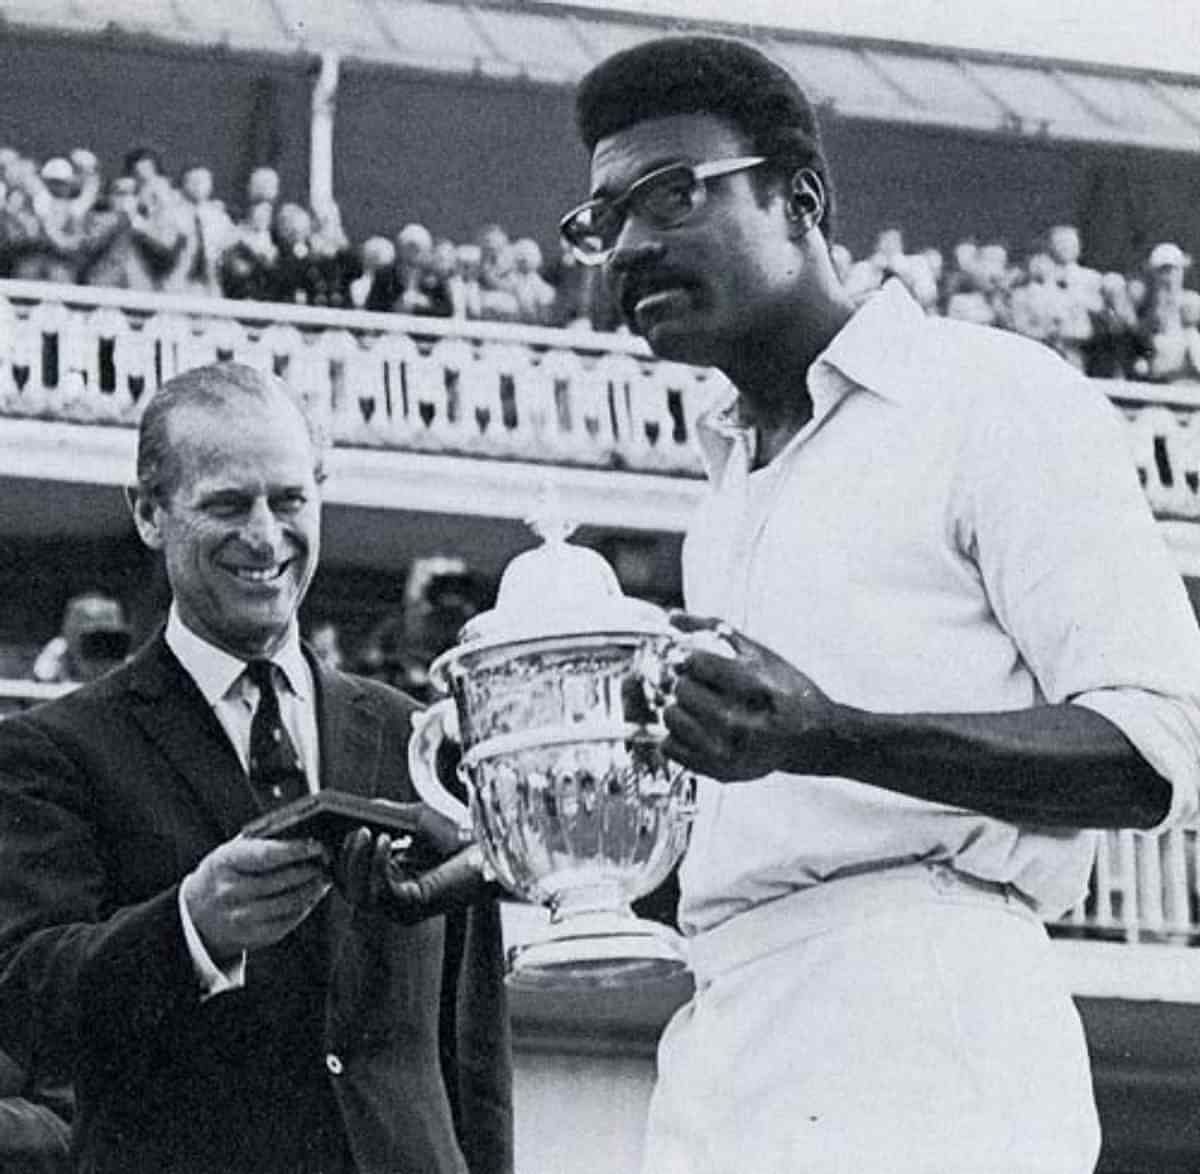 Clive Lloyd with the 1975 Cricket World Cup Trophy